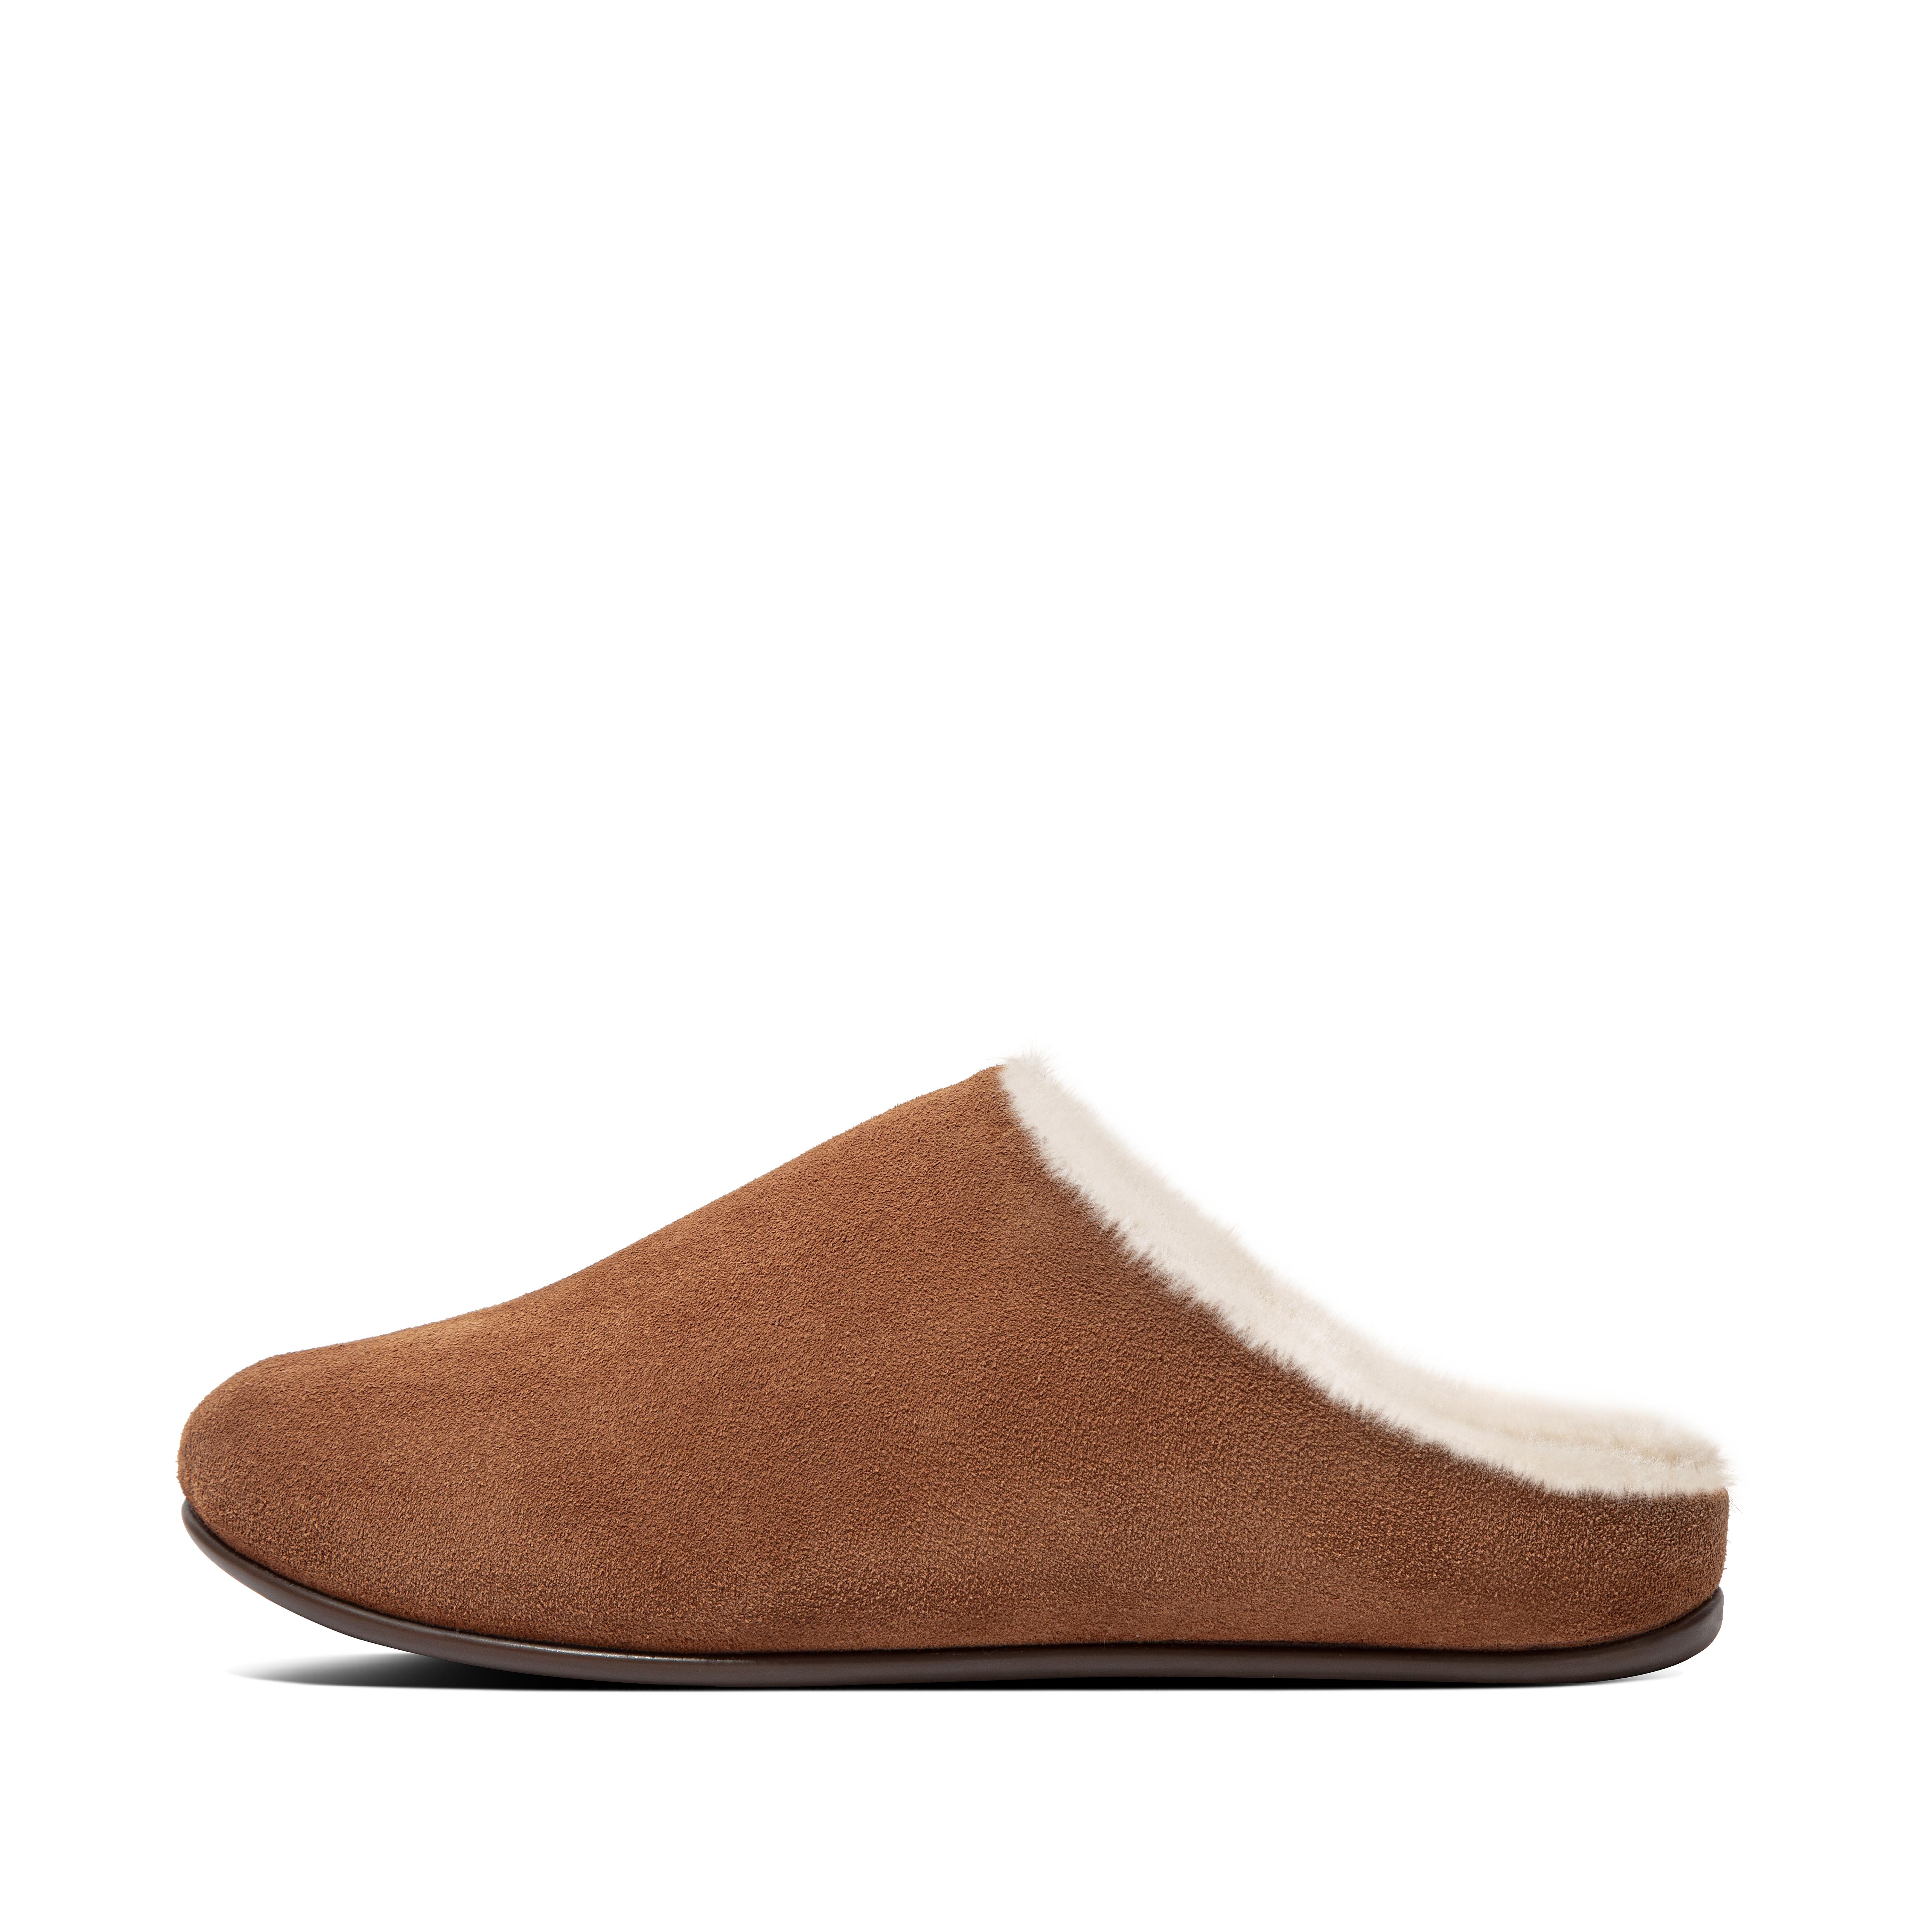 Fitflop Shearling Suede Slippers